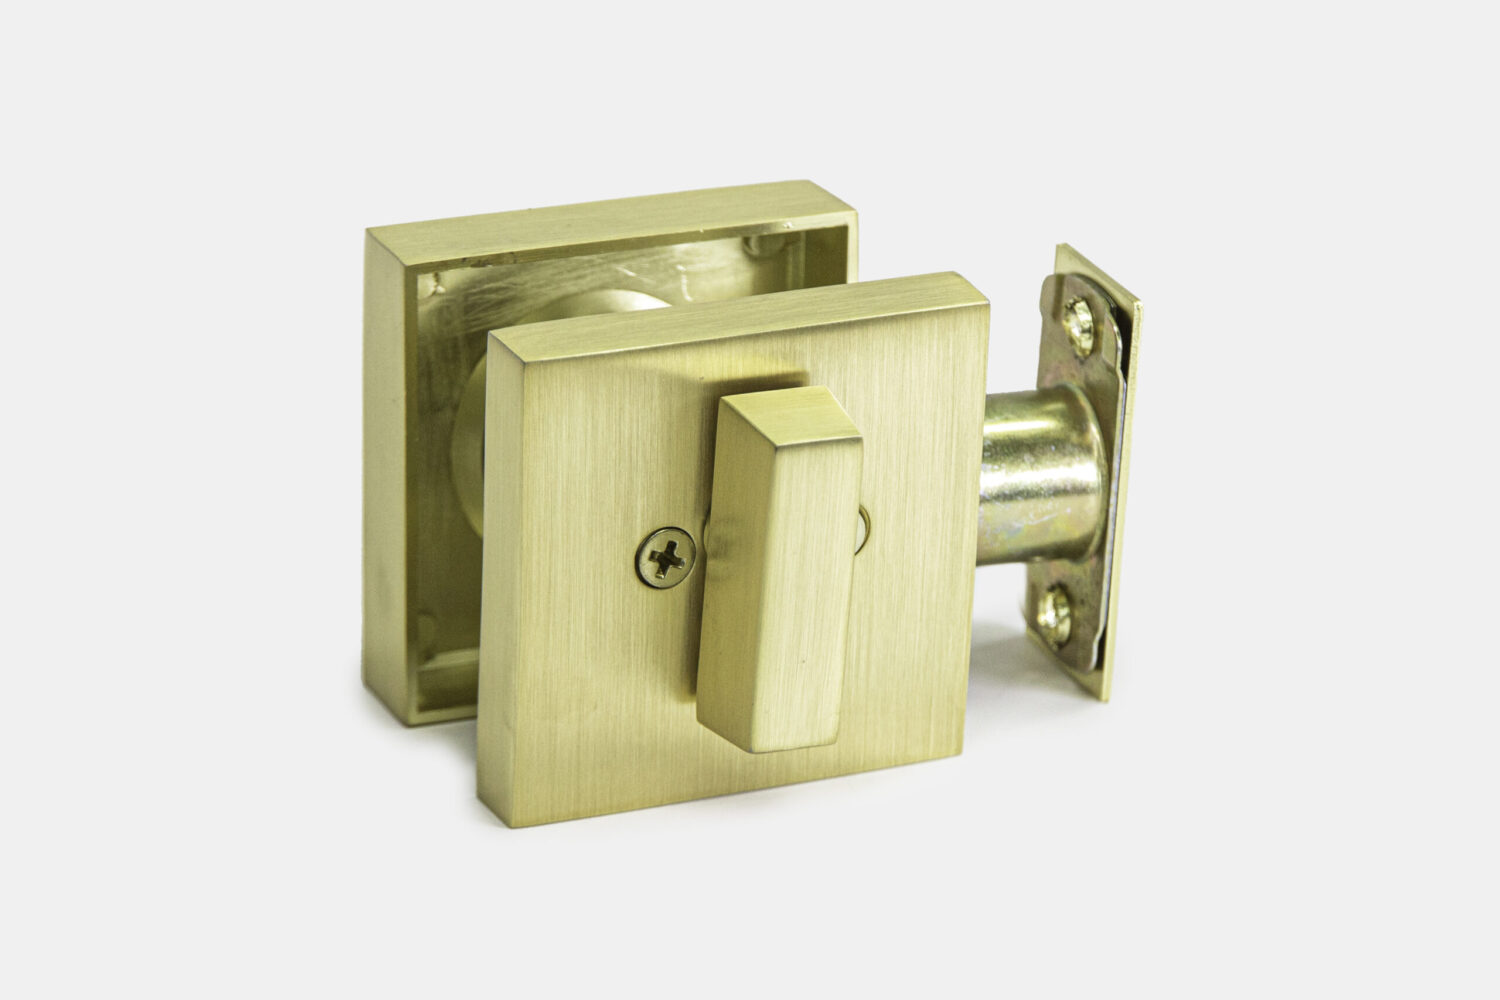 Square deadbolt satin brass finish, available keyed different and keyed alike